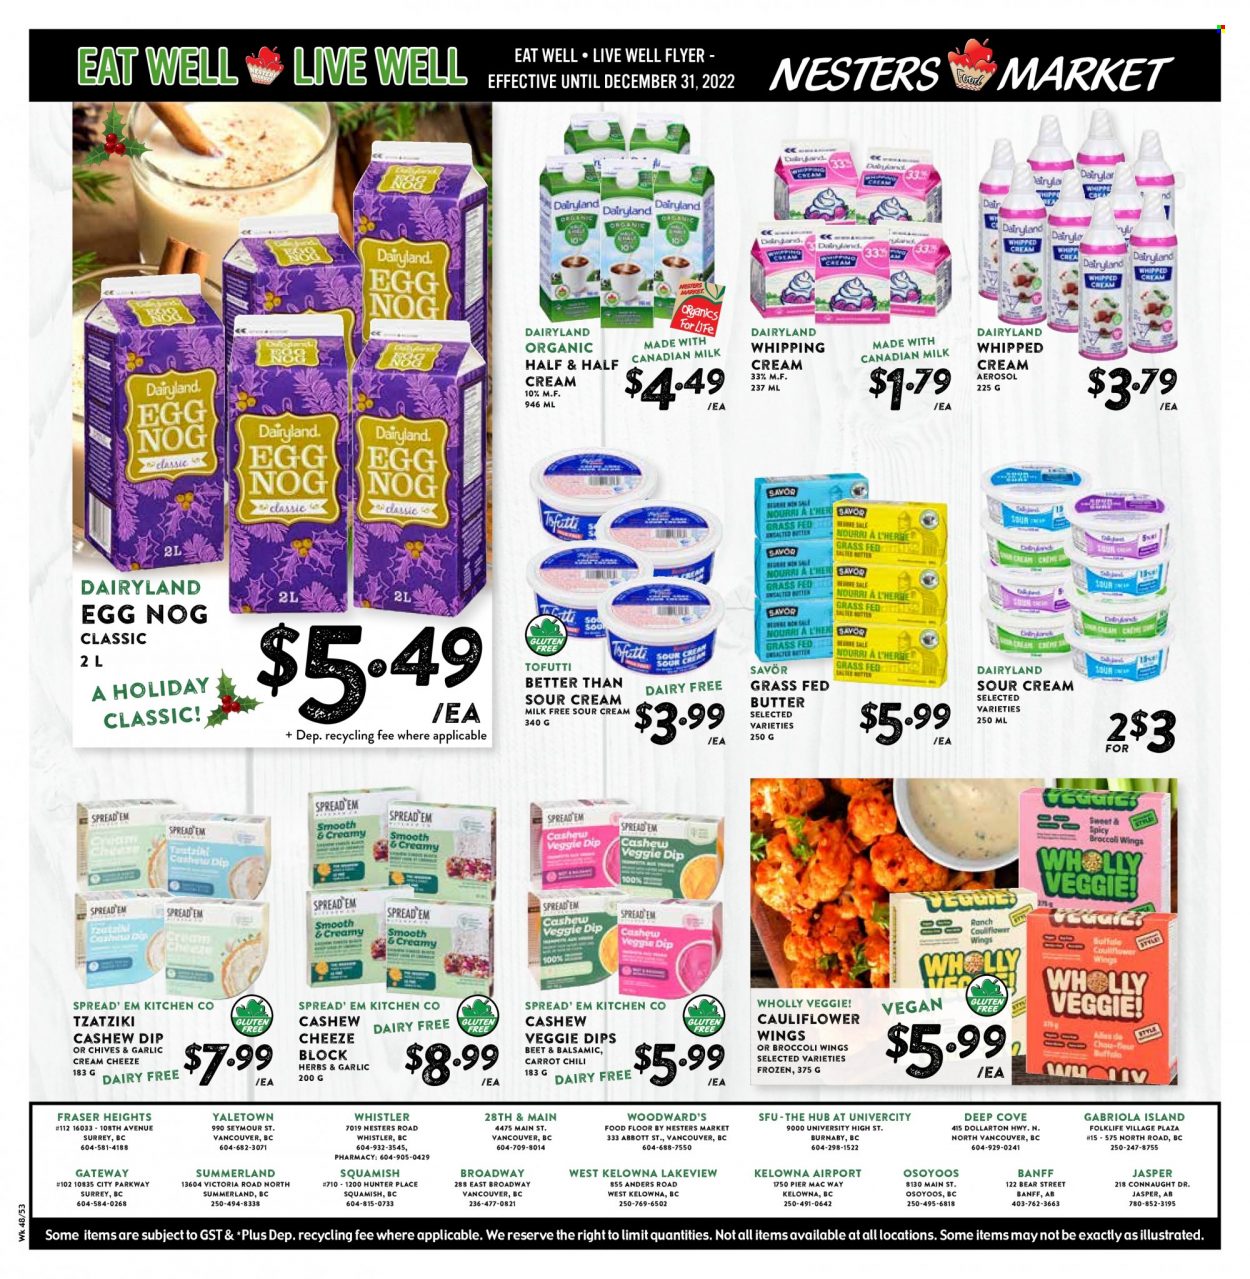 thumbnail - Nesters Food Market Flyer - November 20, 2022 - December 31, 2022 - Sales products - broccoli, chives, tzatziki, milk, eggs, butter, sour cream, whipped cream, whipping cream, dip, herbs, Half and half. Page 6.